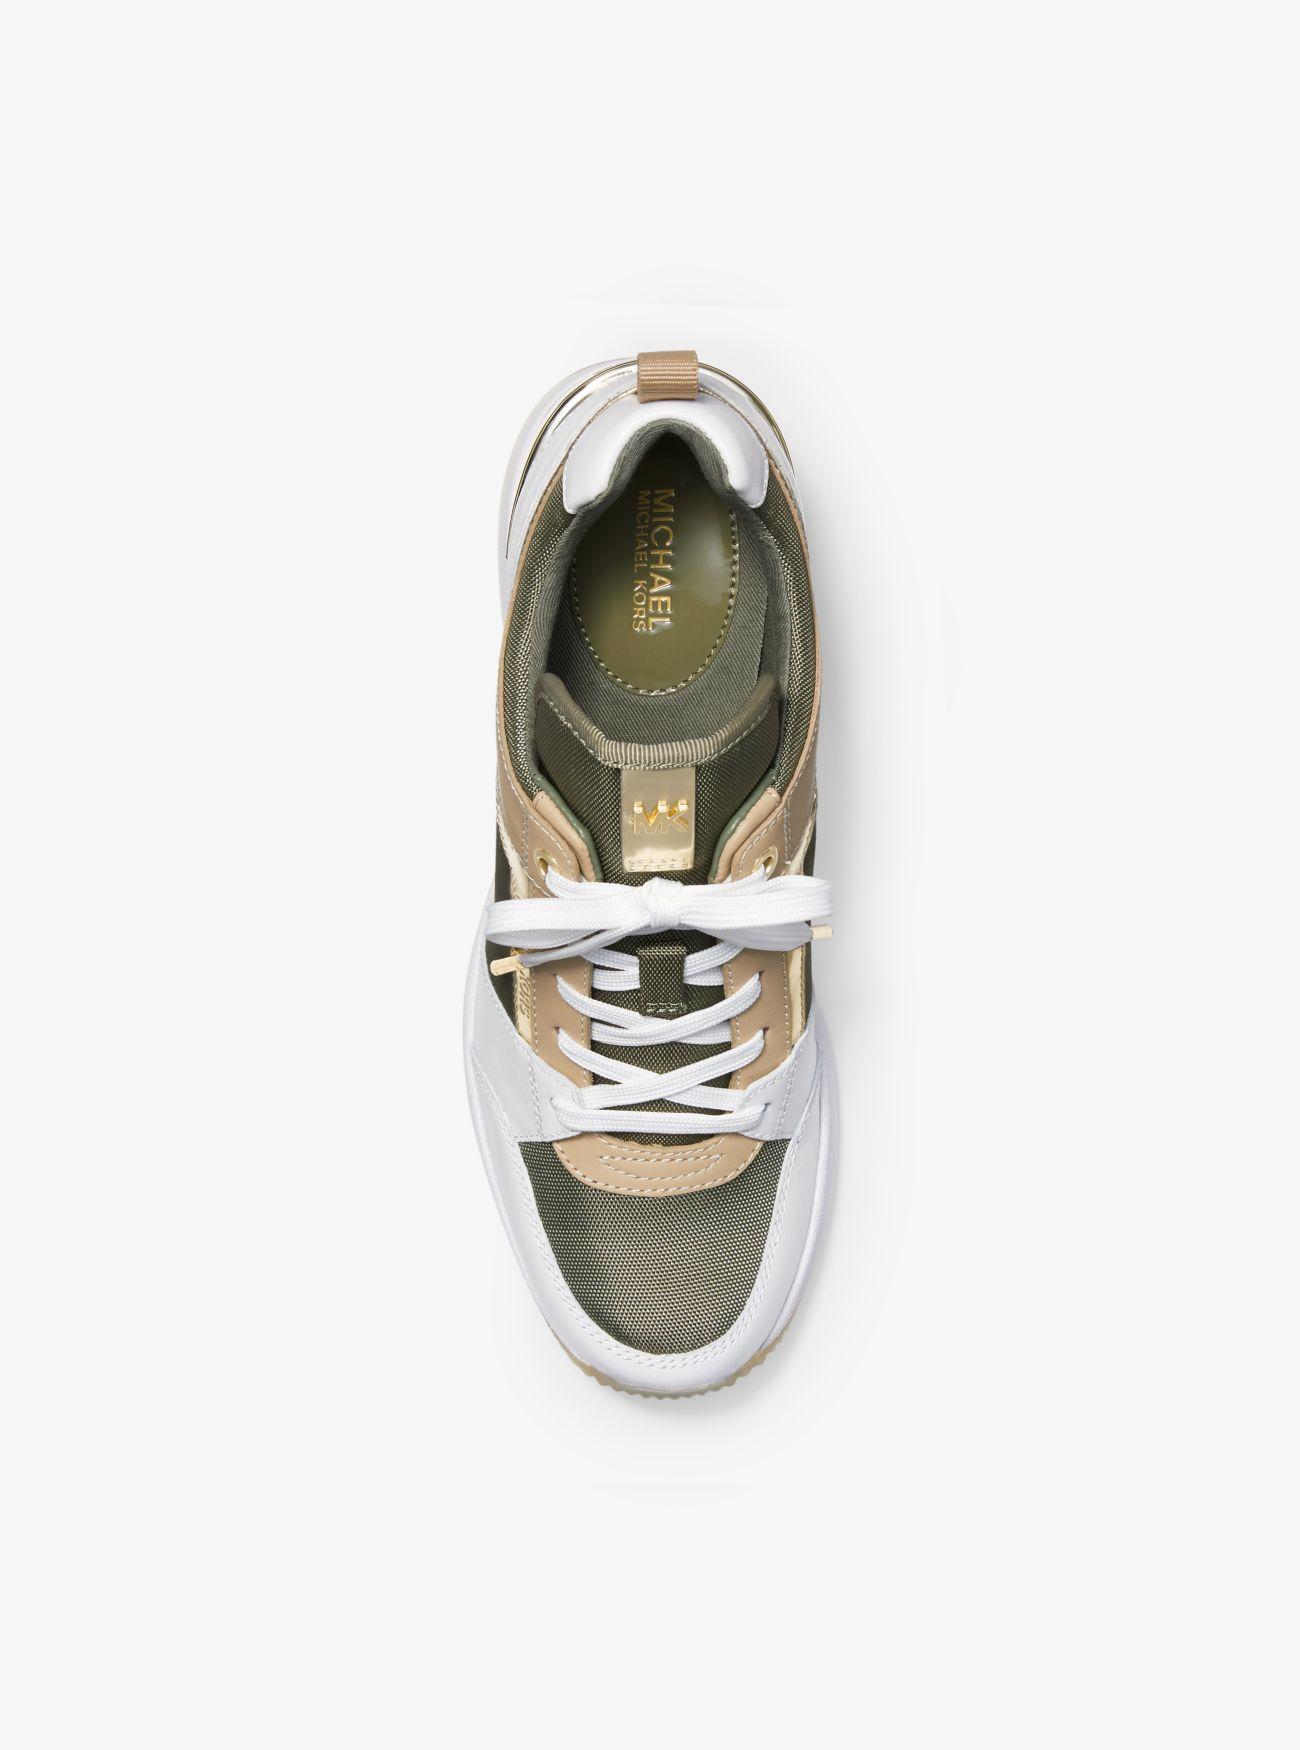 Michael Kors Georgie Canvas And Leather Trainer in Green - Lyst